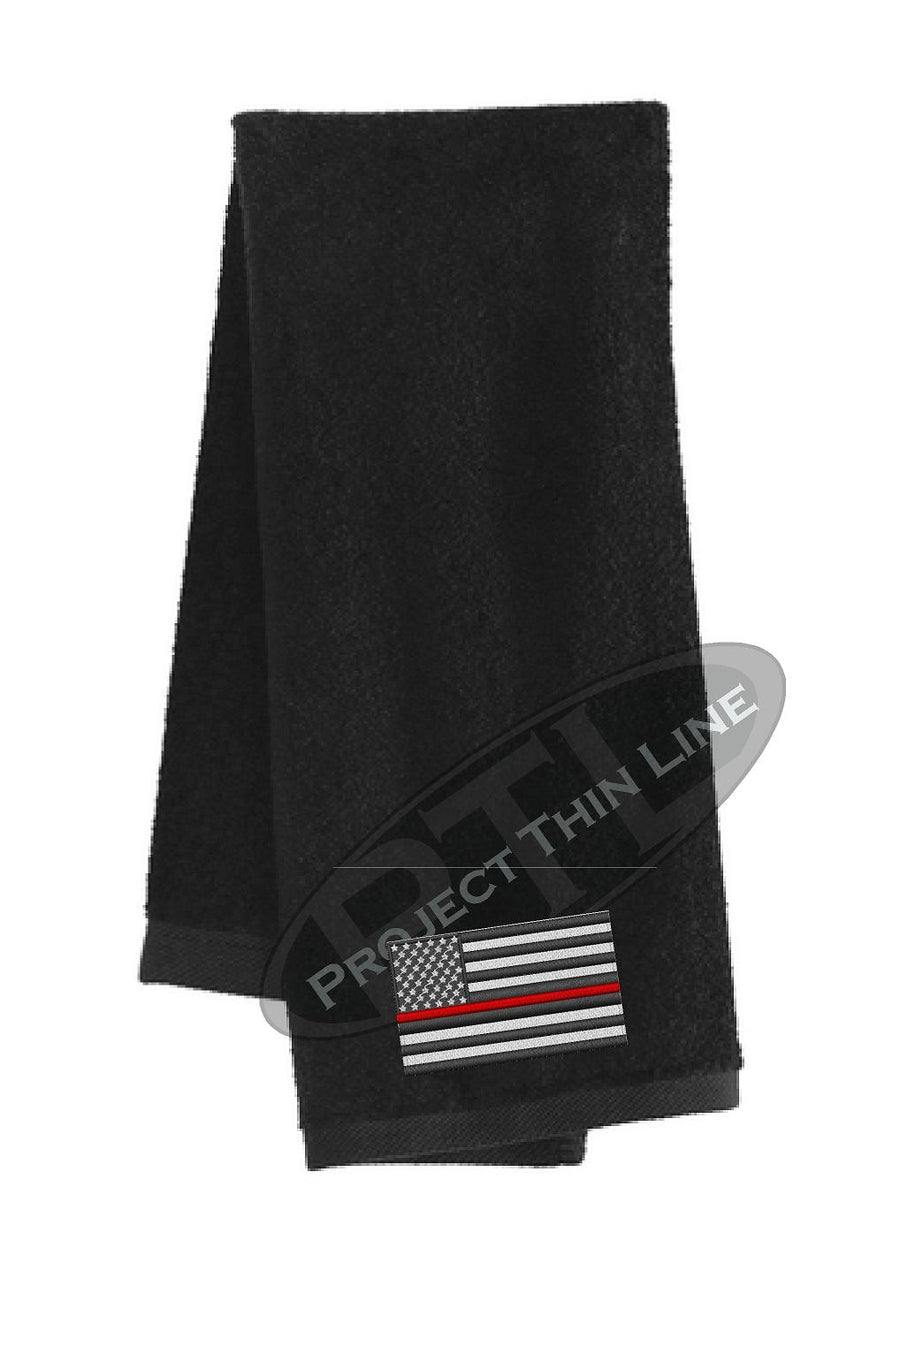 Thin RED Line Flag Workout Gym Towel